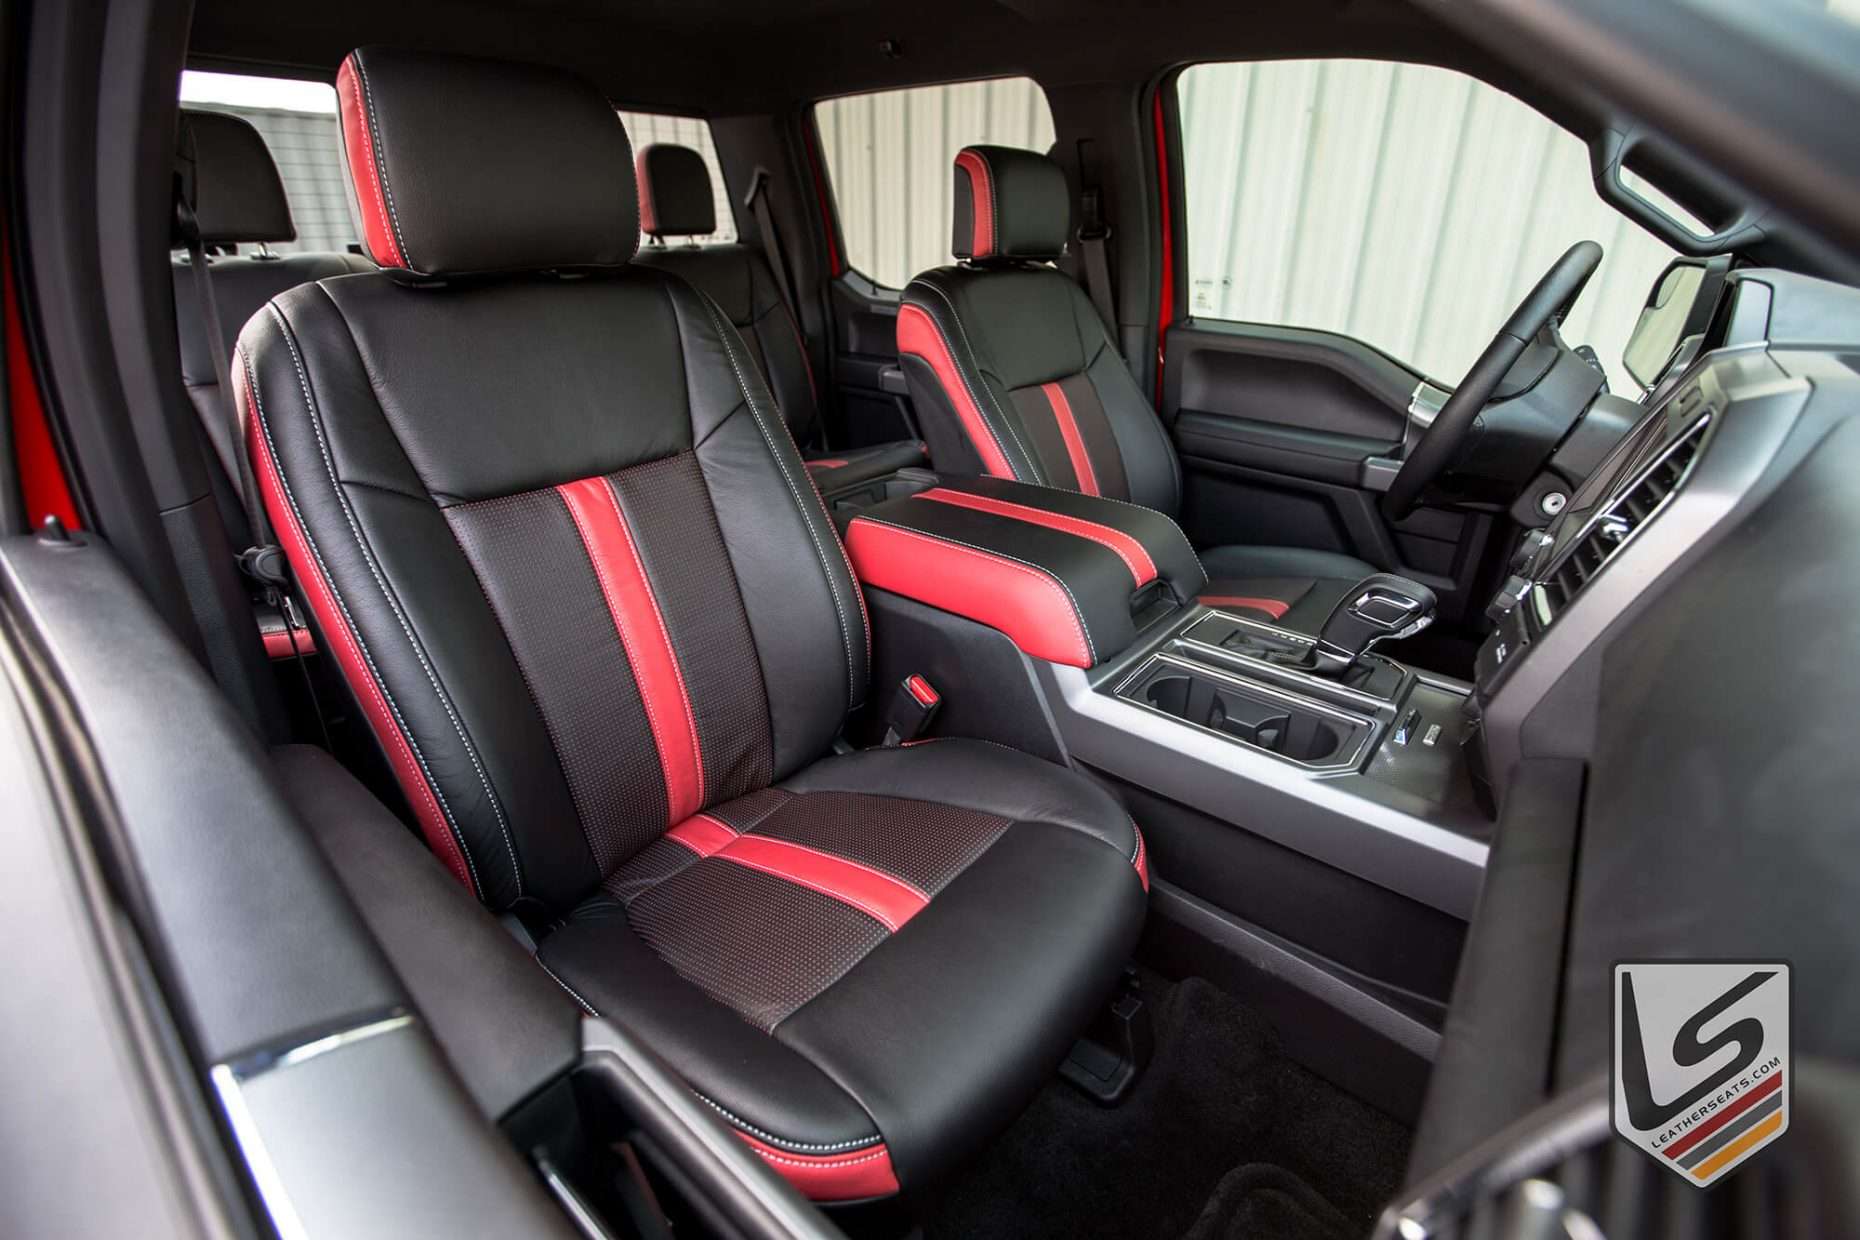 Ford F-150 leather seats in Black/Piazza Red/Bright REd - Front row from passenger side